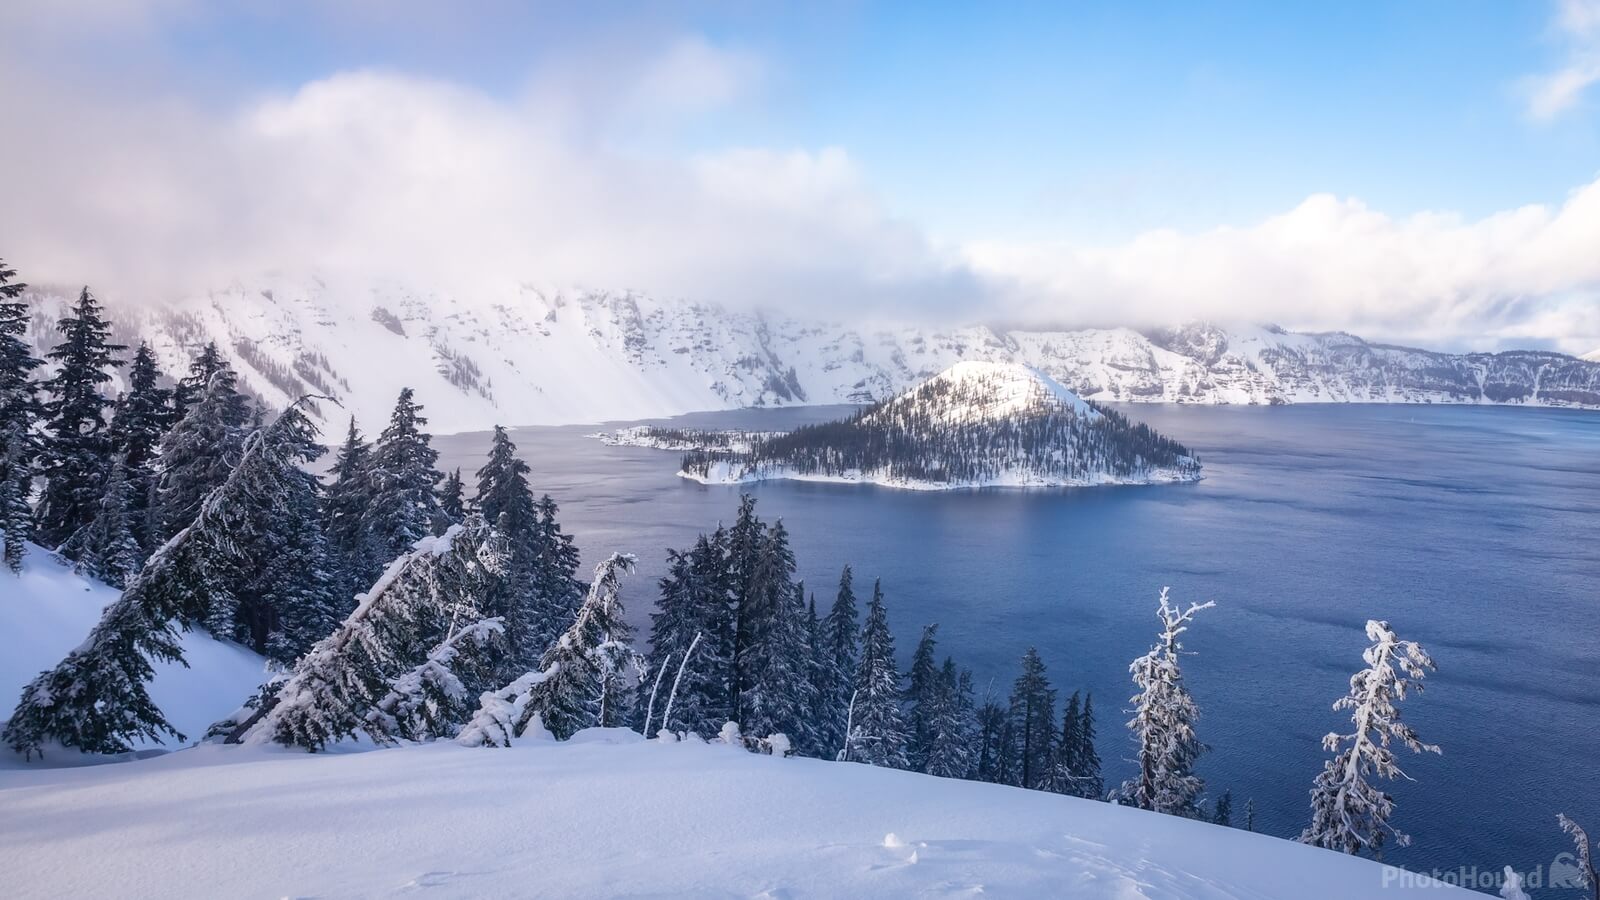 Image of Crater Lake - Discovery Point Trail by Greg Valle